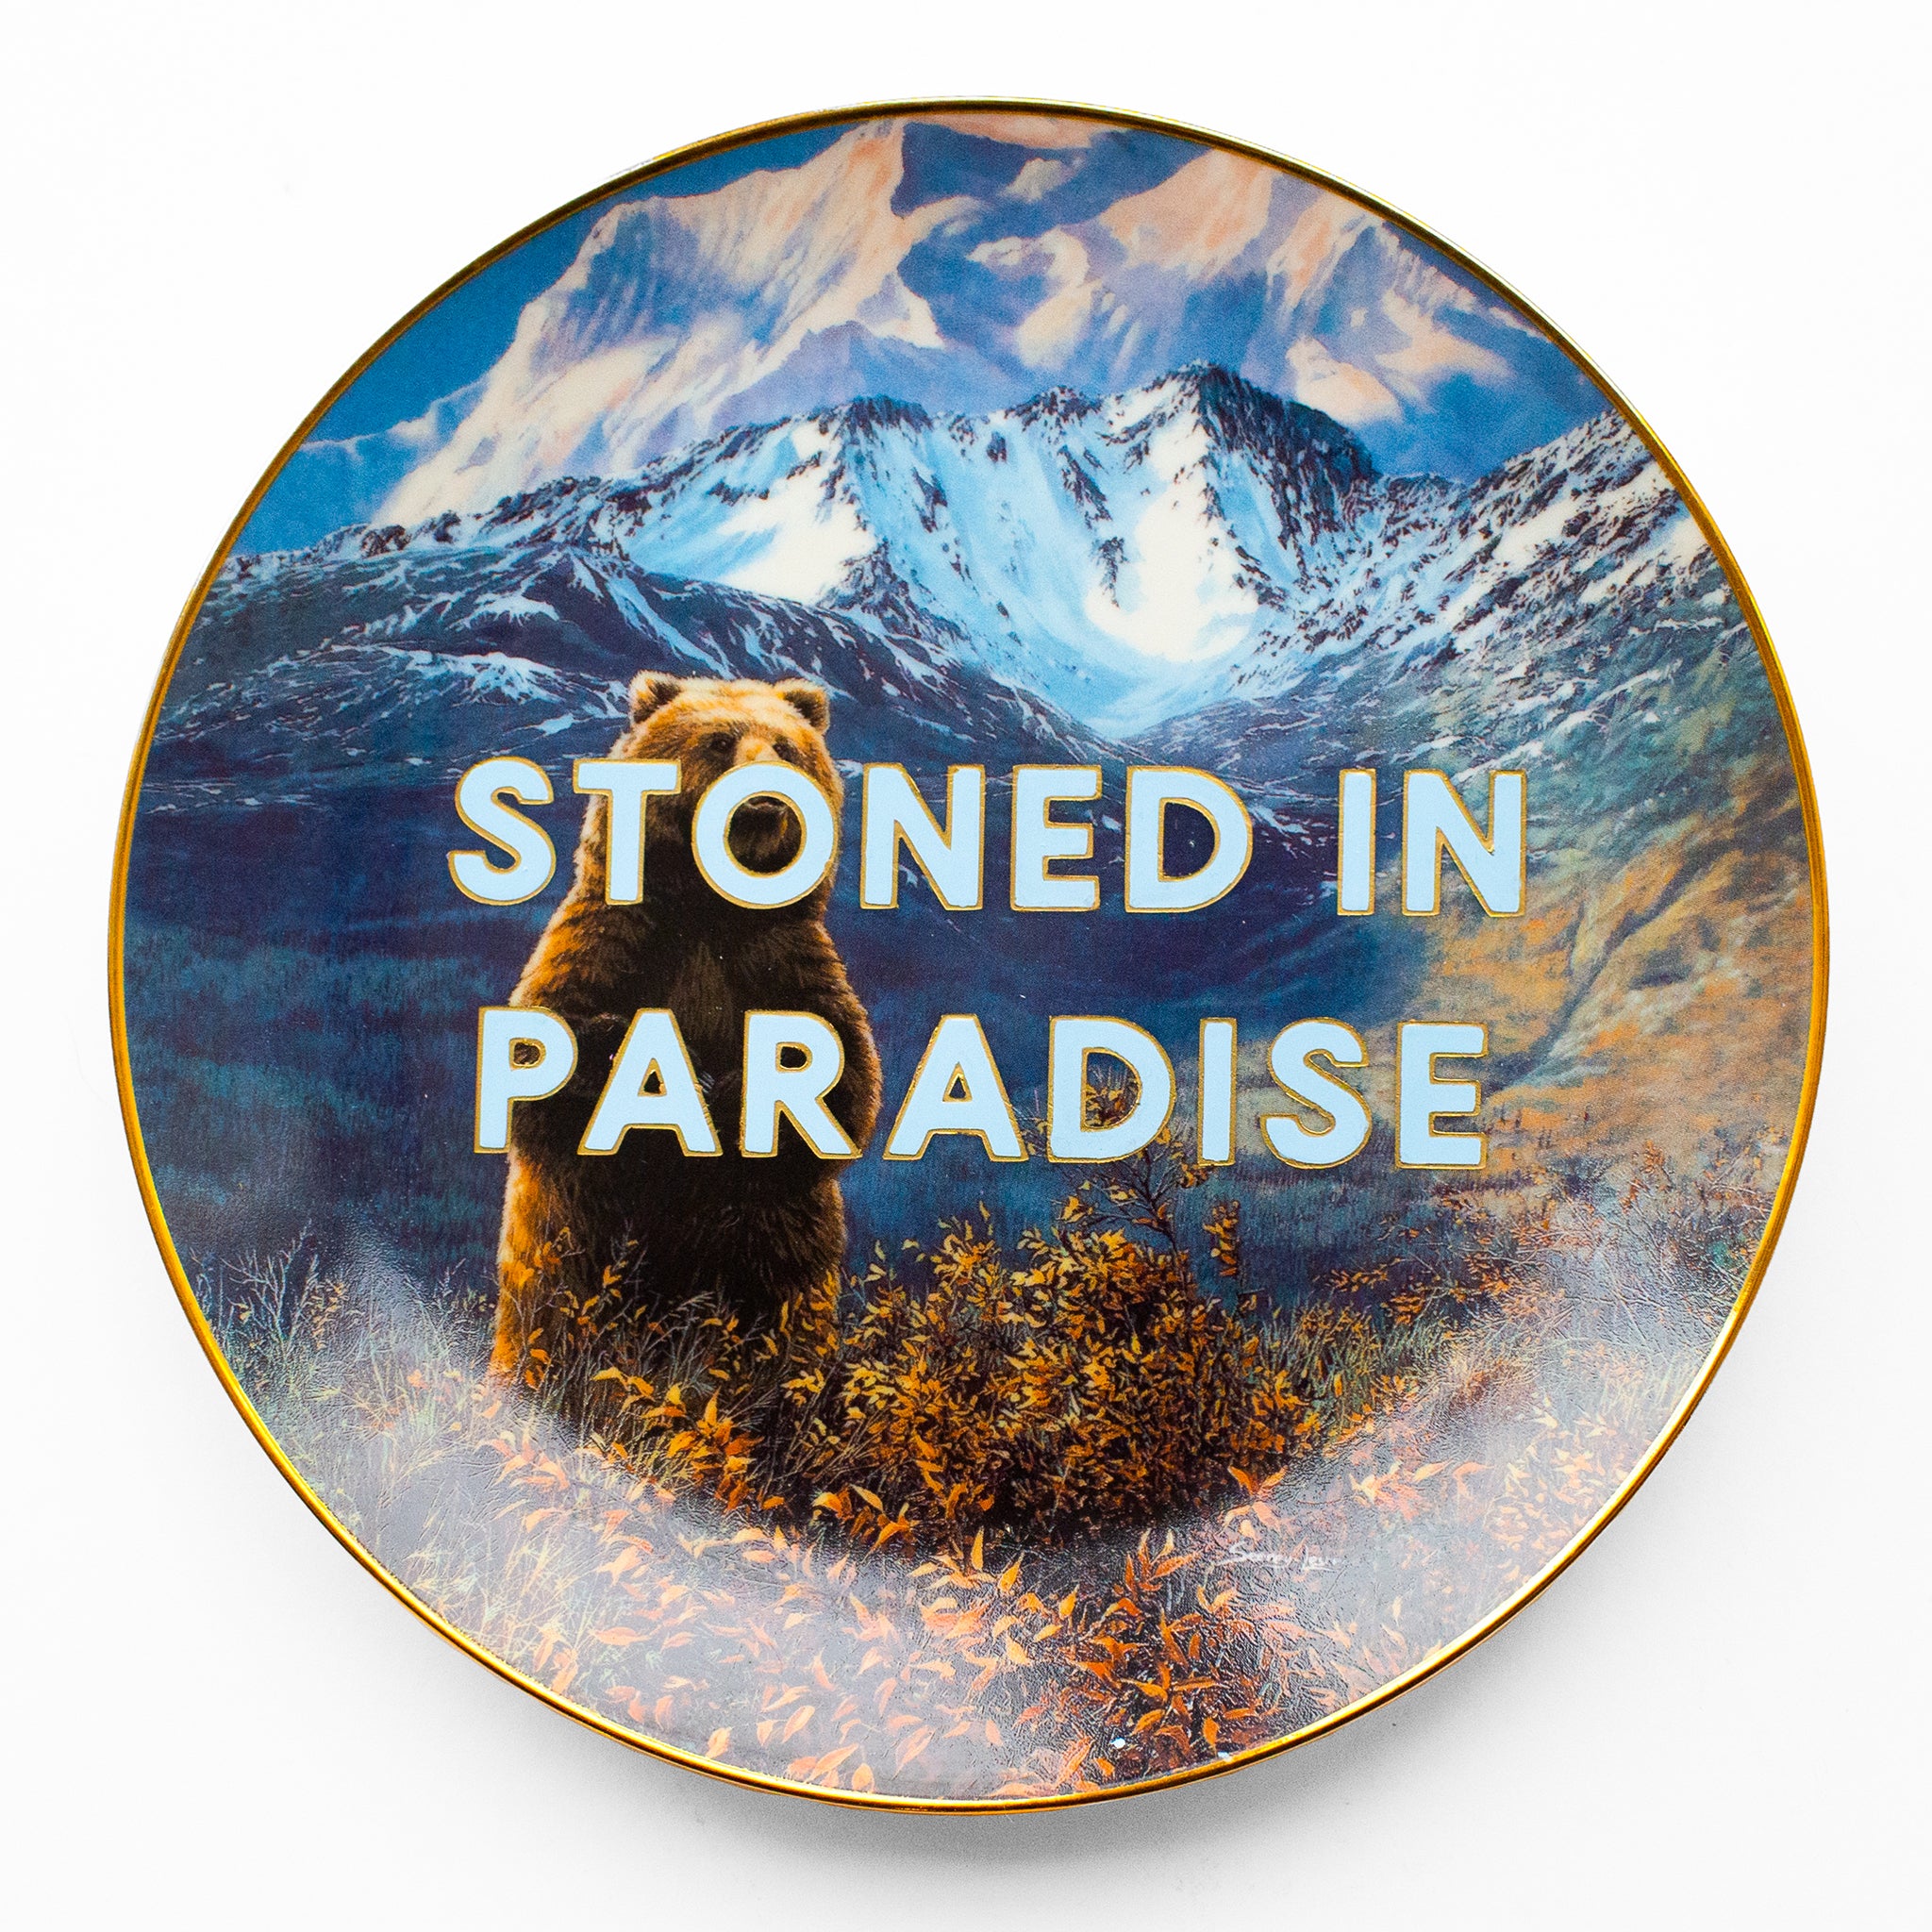 Stoned in Paradise